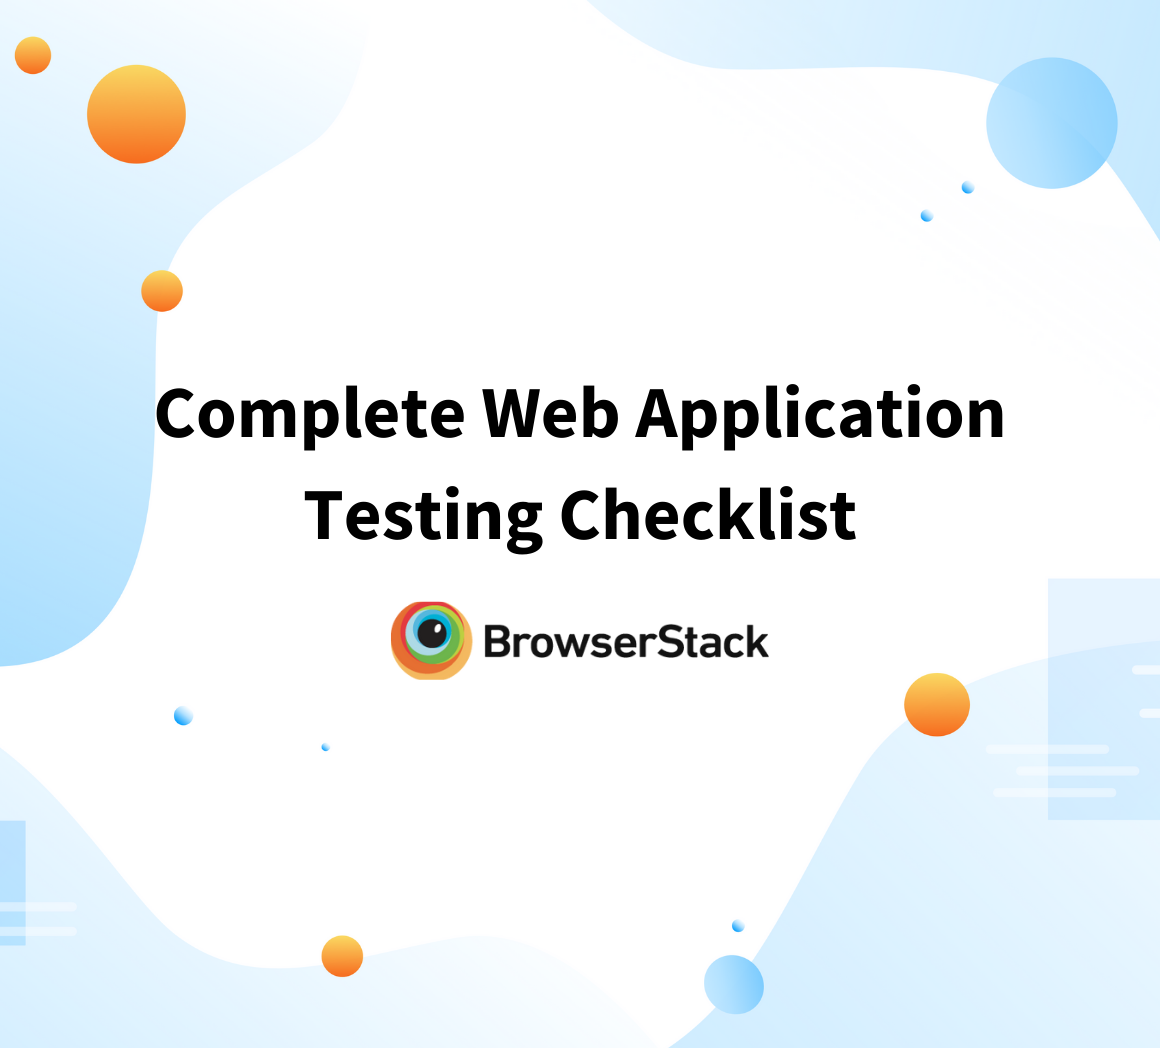 A Complete Web Application Testing Checklist: How to Test a Website